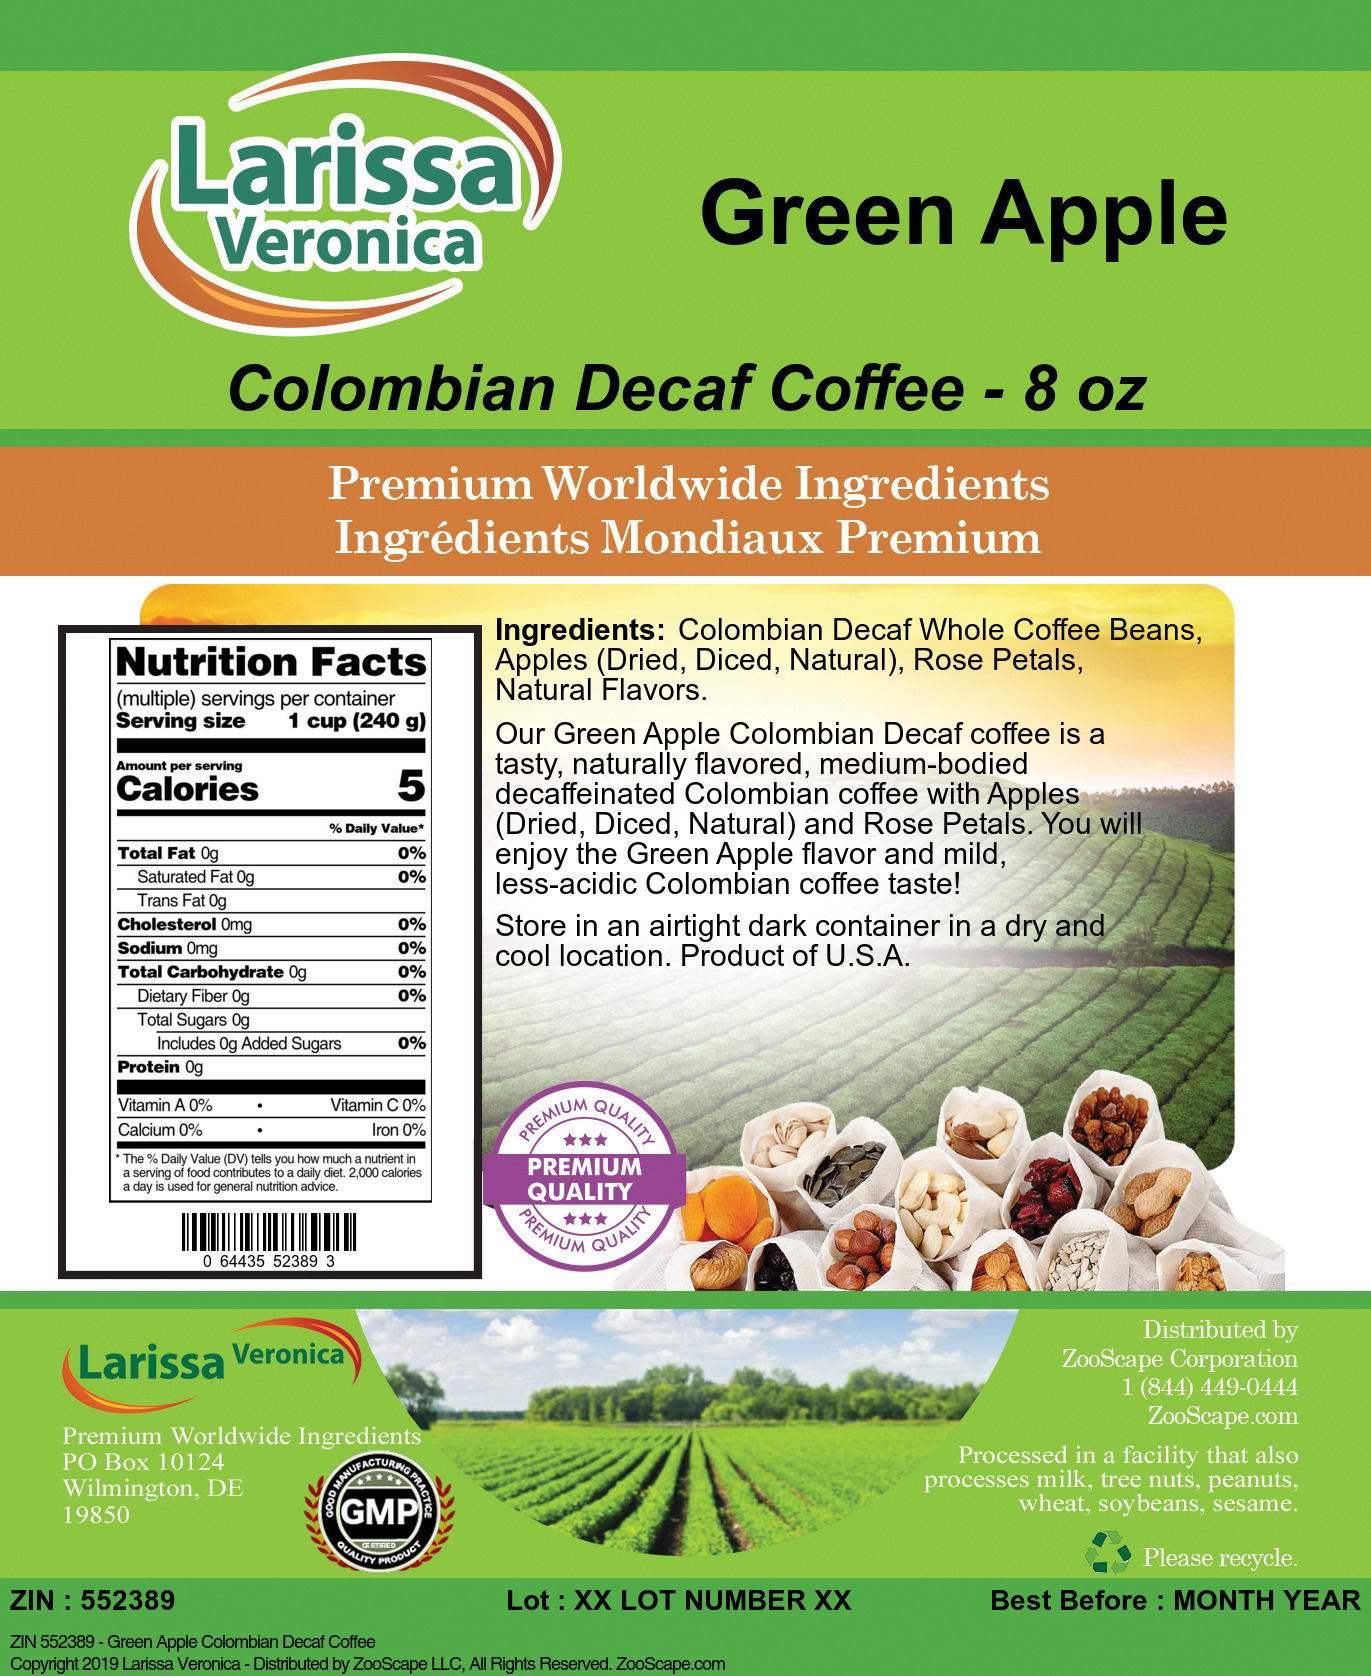 Green Apple Colombian Decaf Coffee - Label